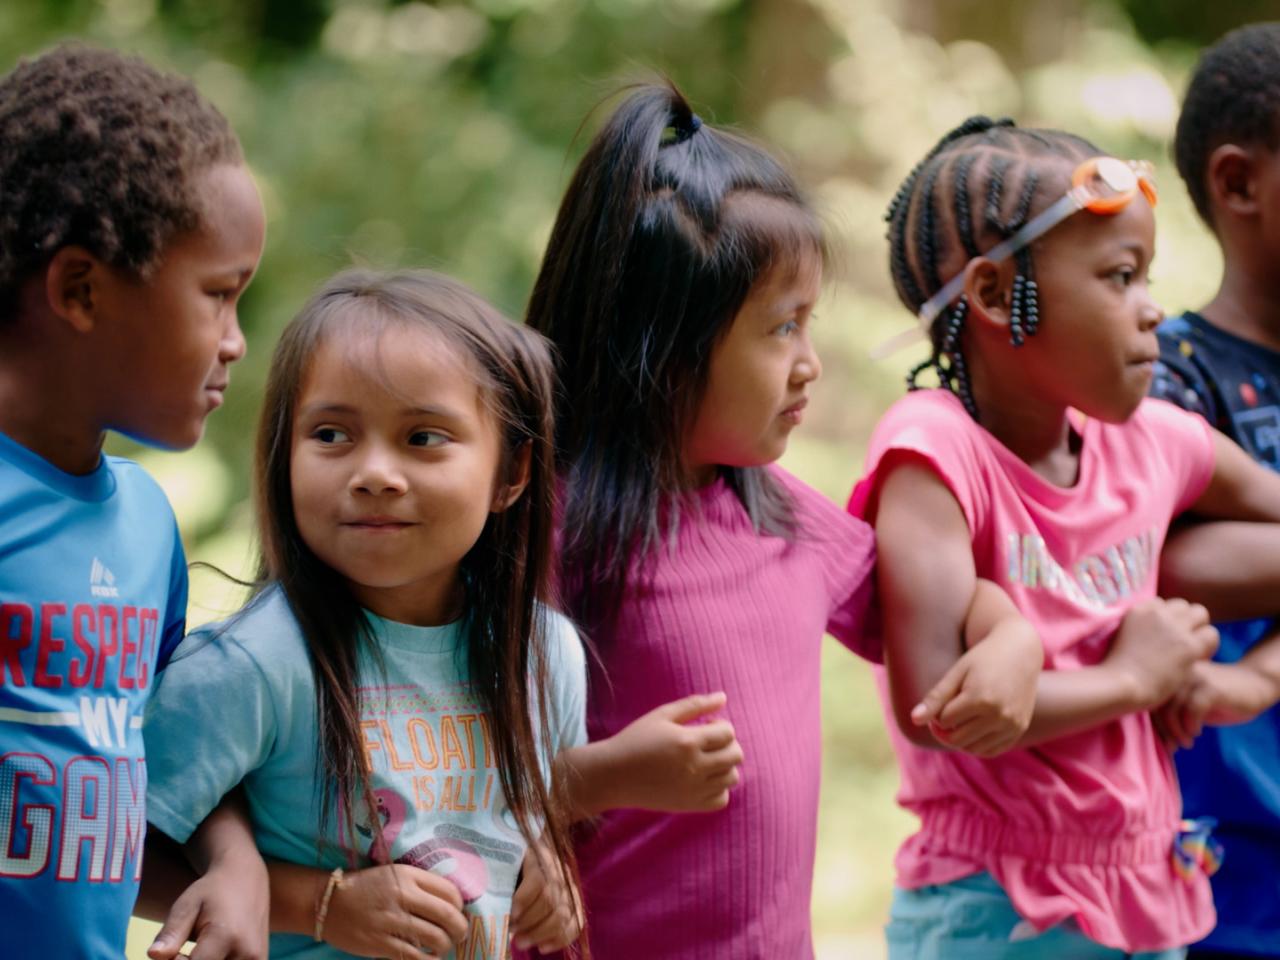 In this still from the film Upstream, Downriver, a group of children are outdoors linking arms.